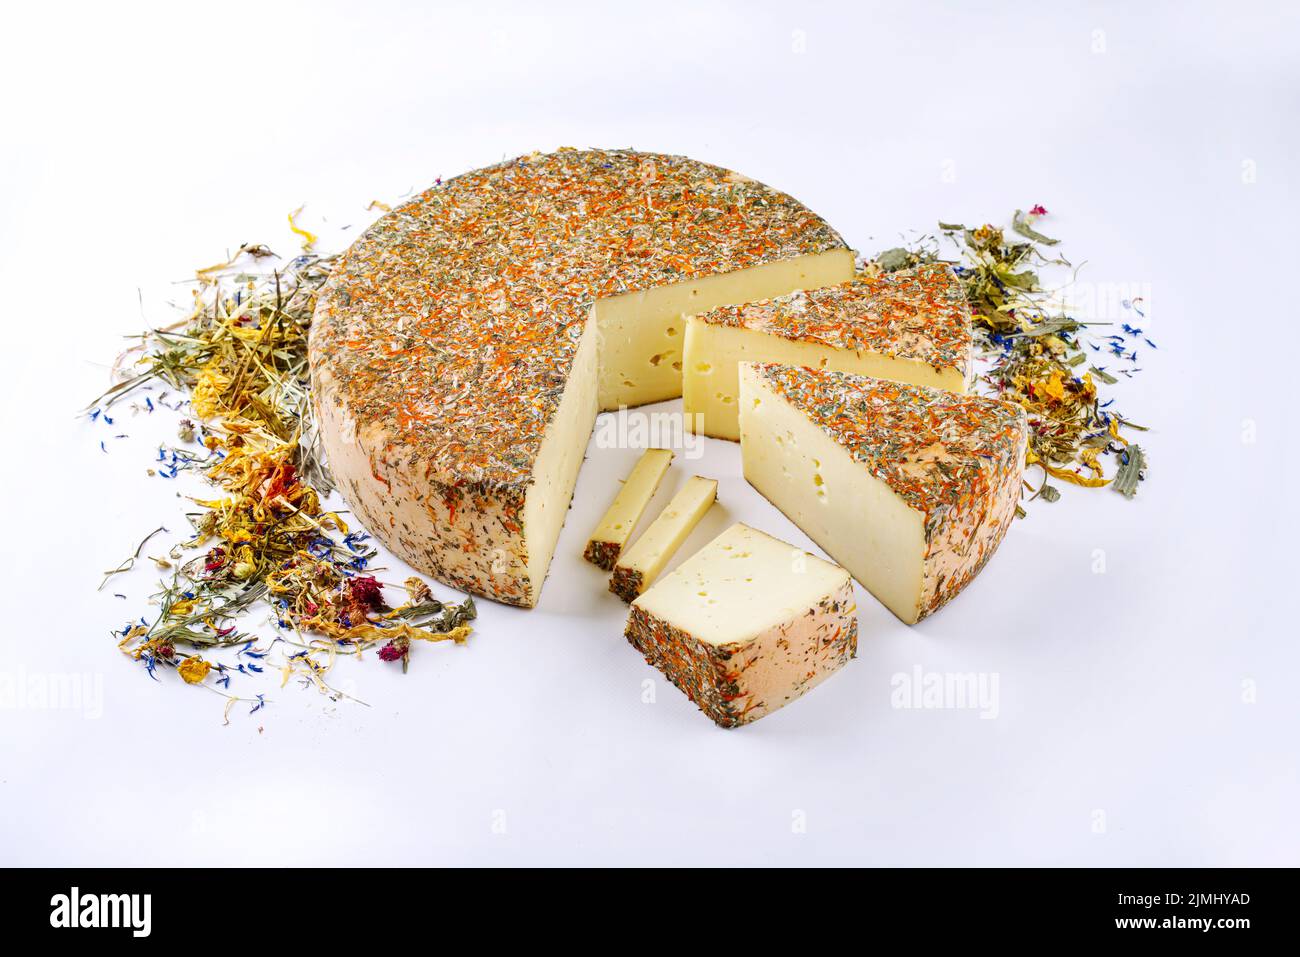 Traditional aged hay flower mountain cheese loaf of the Alps offered as loaf and sliced on white background with copy space Stock Photo